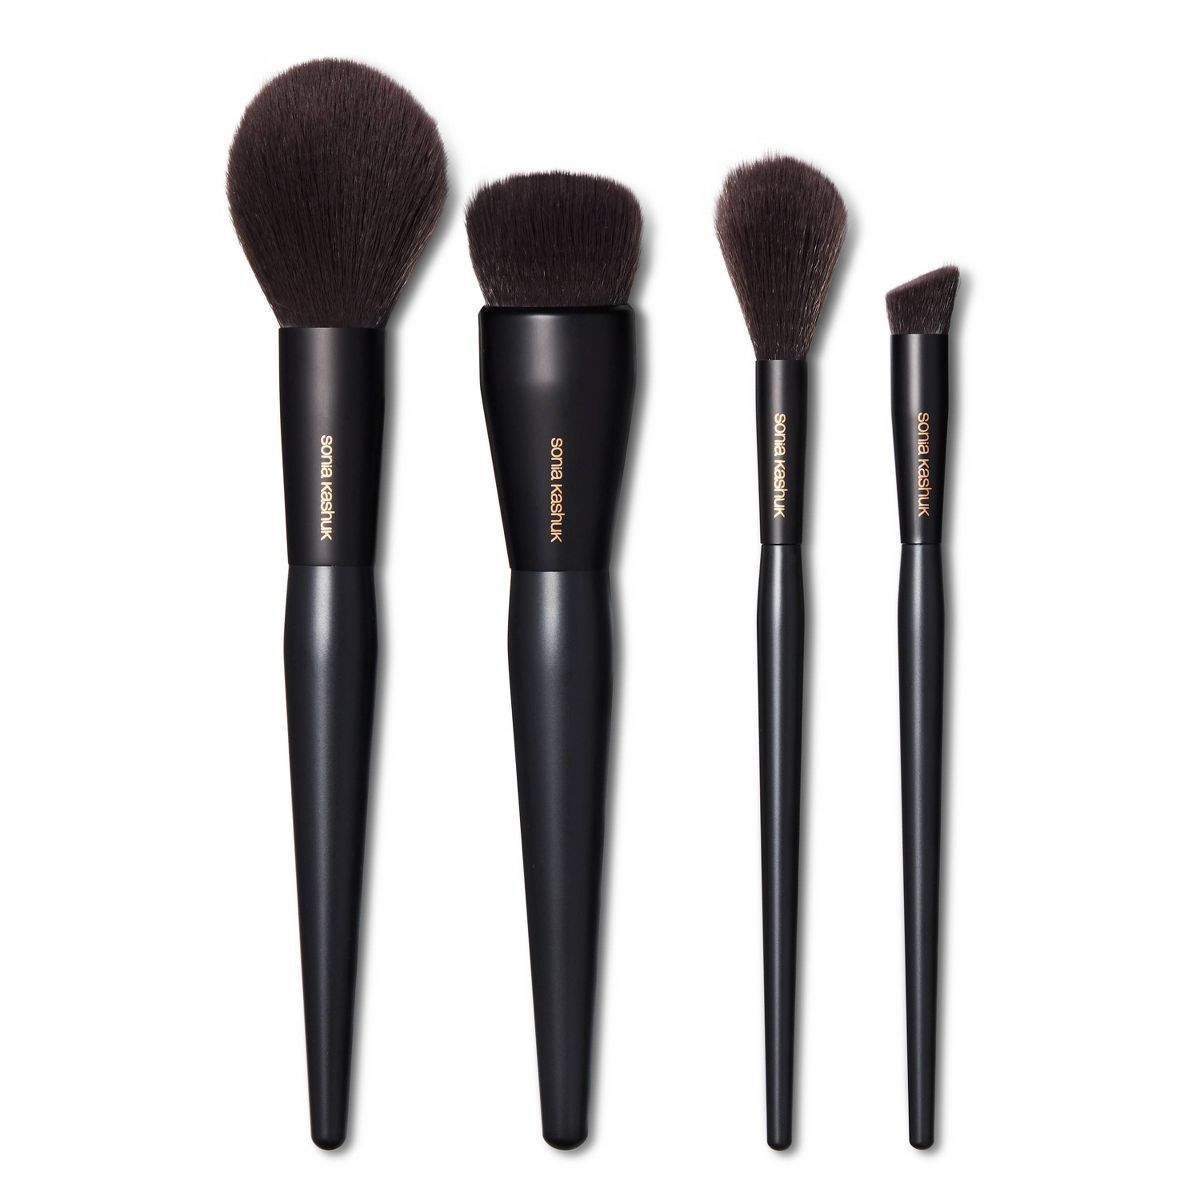 Sonia Kashuk™ Professional Complete Face Set - 4pc | Target